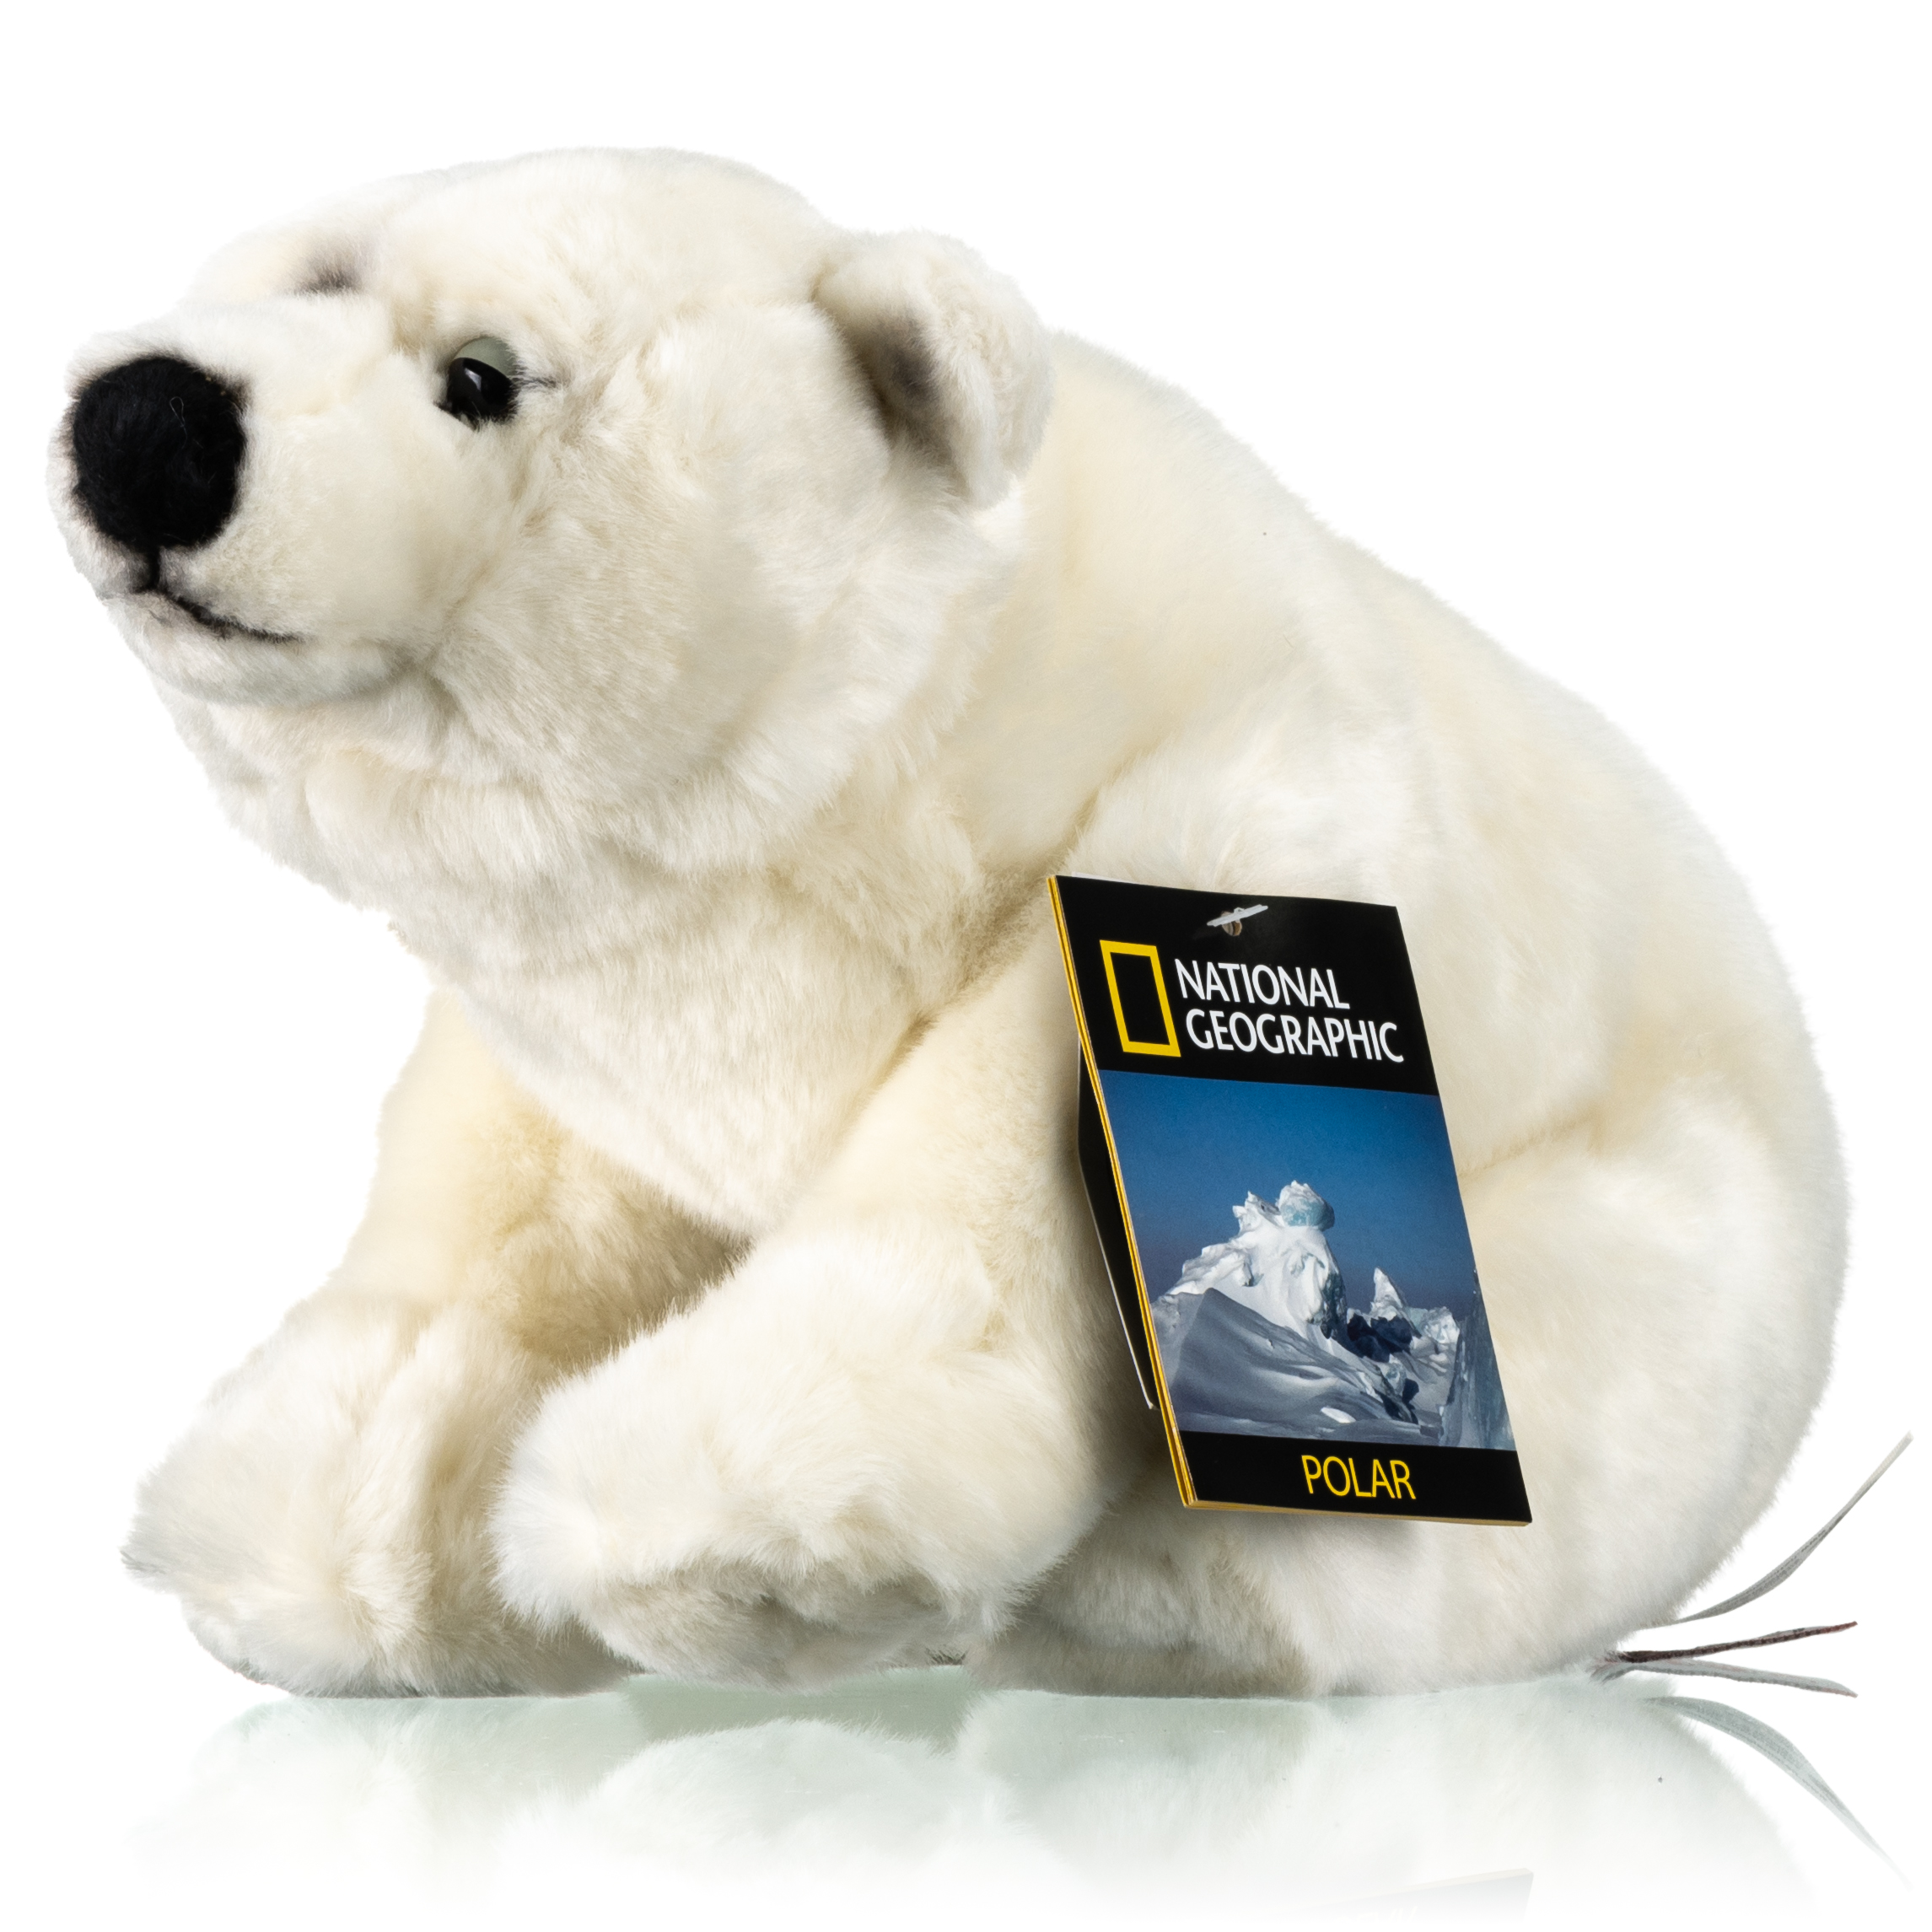 Ours polaire en peluche NATIONAL GEOGRAPHIC